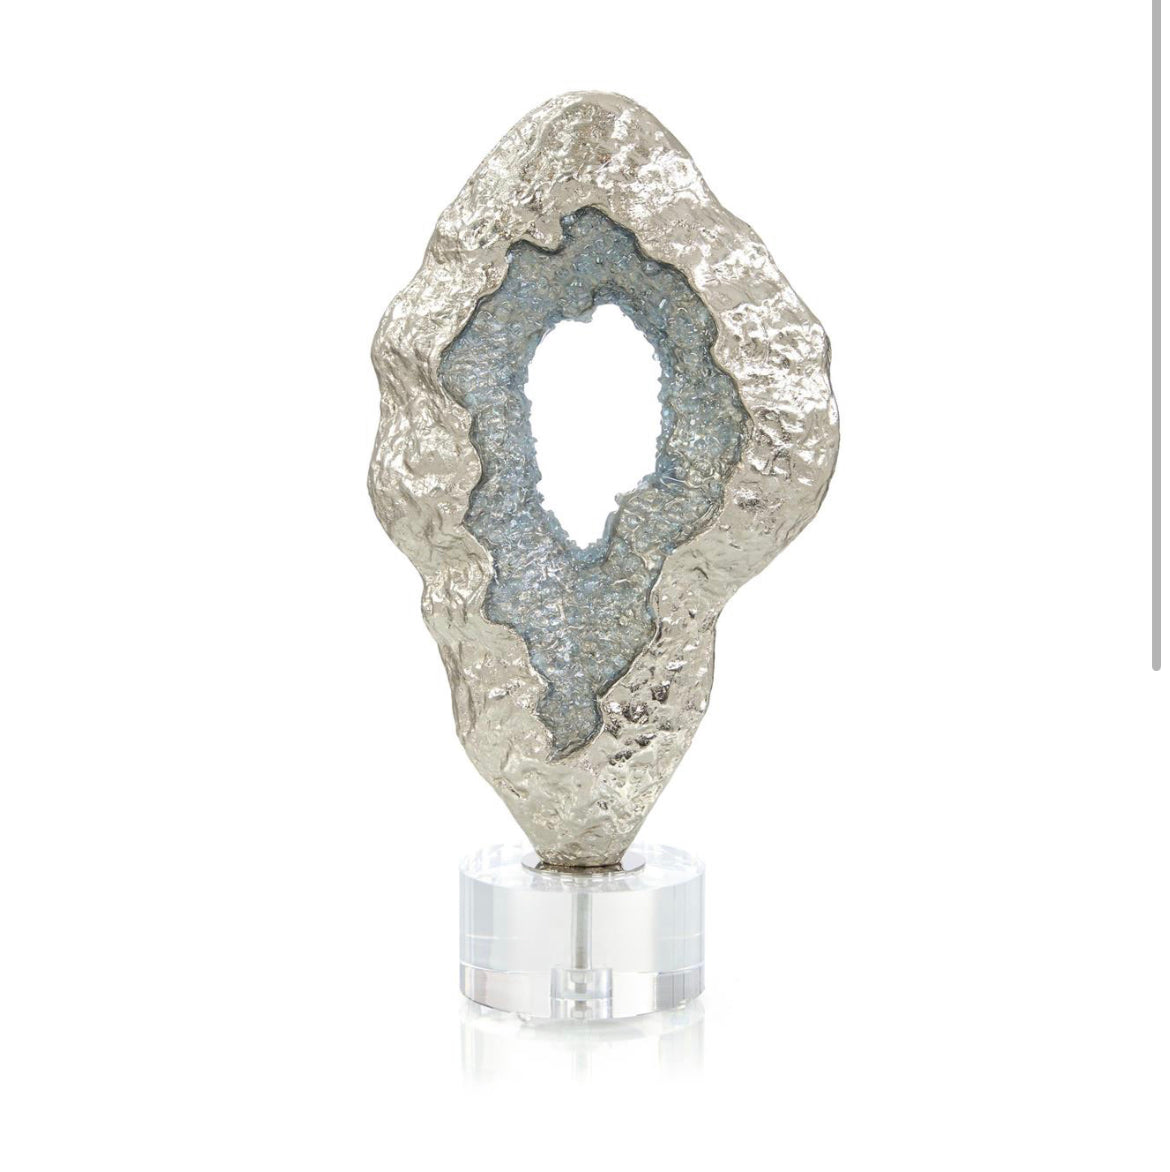 Nickel & Blue Sculpture - Luxury Living Collection